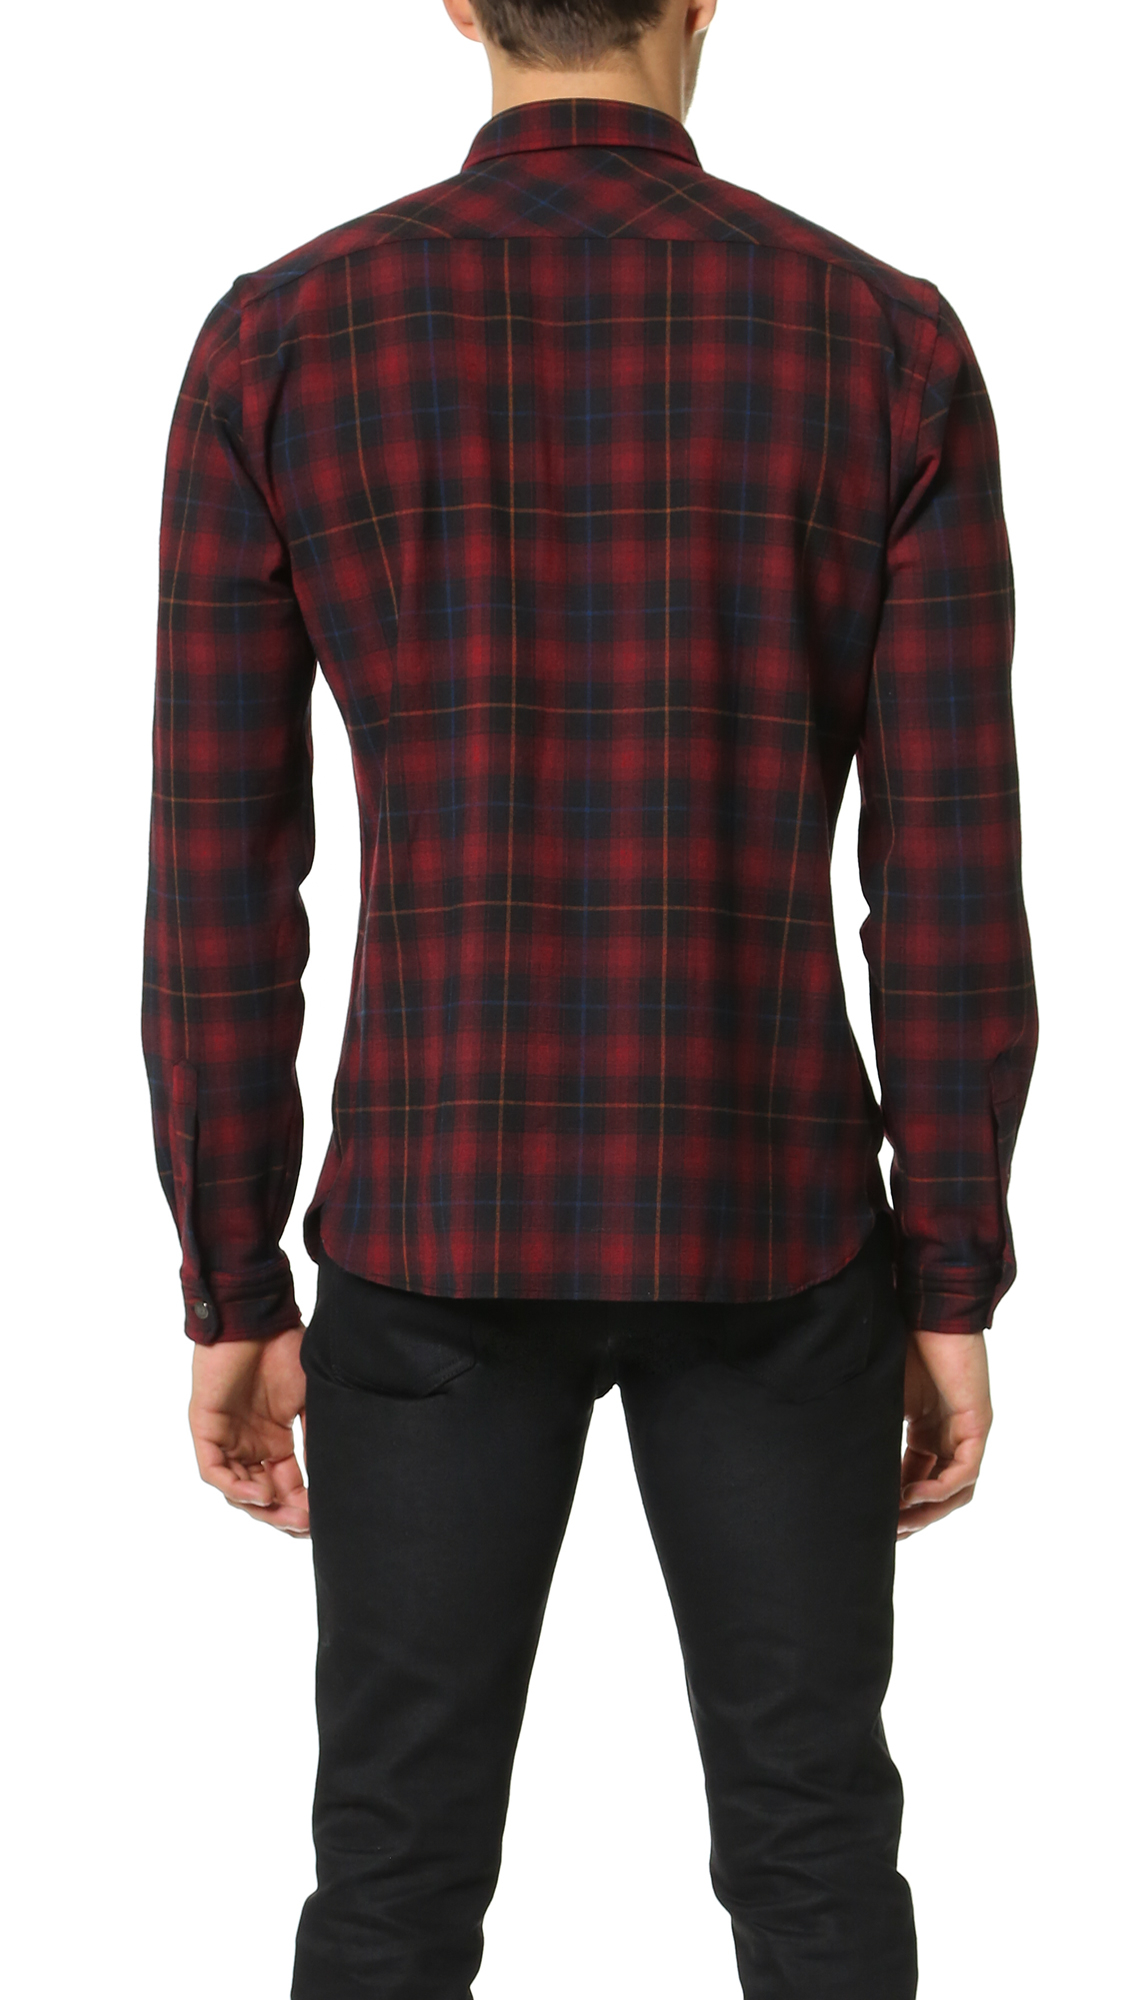 The Kooples Cross Dyed Tartan Shirt in Red for Men - Lyst1128 x 2000